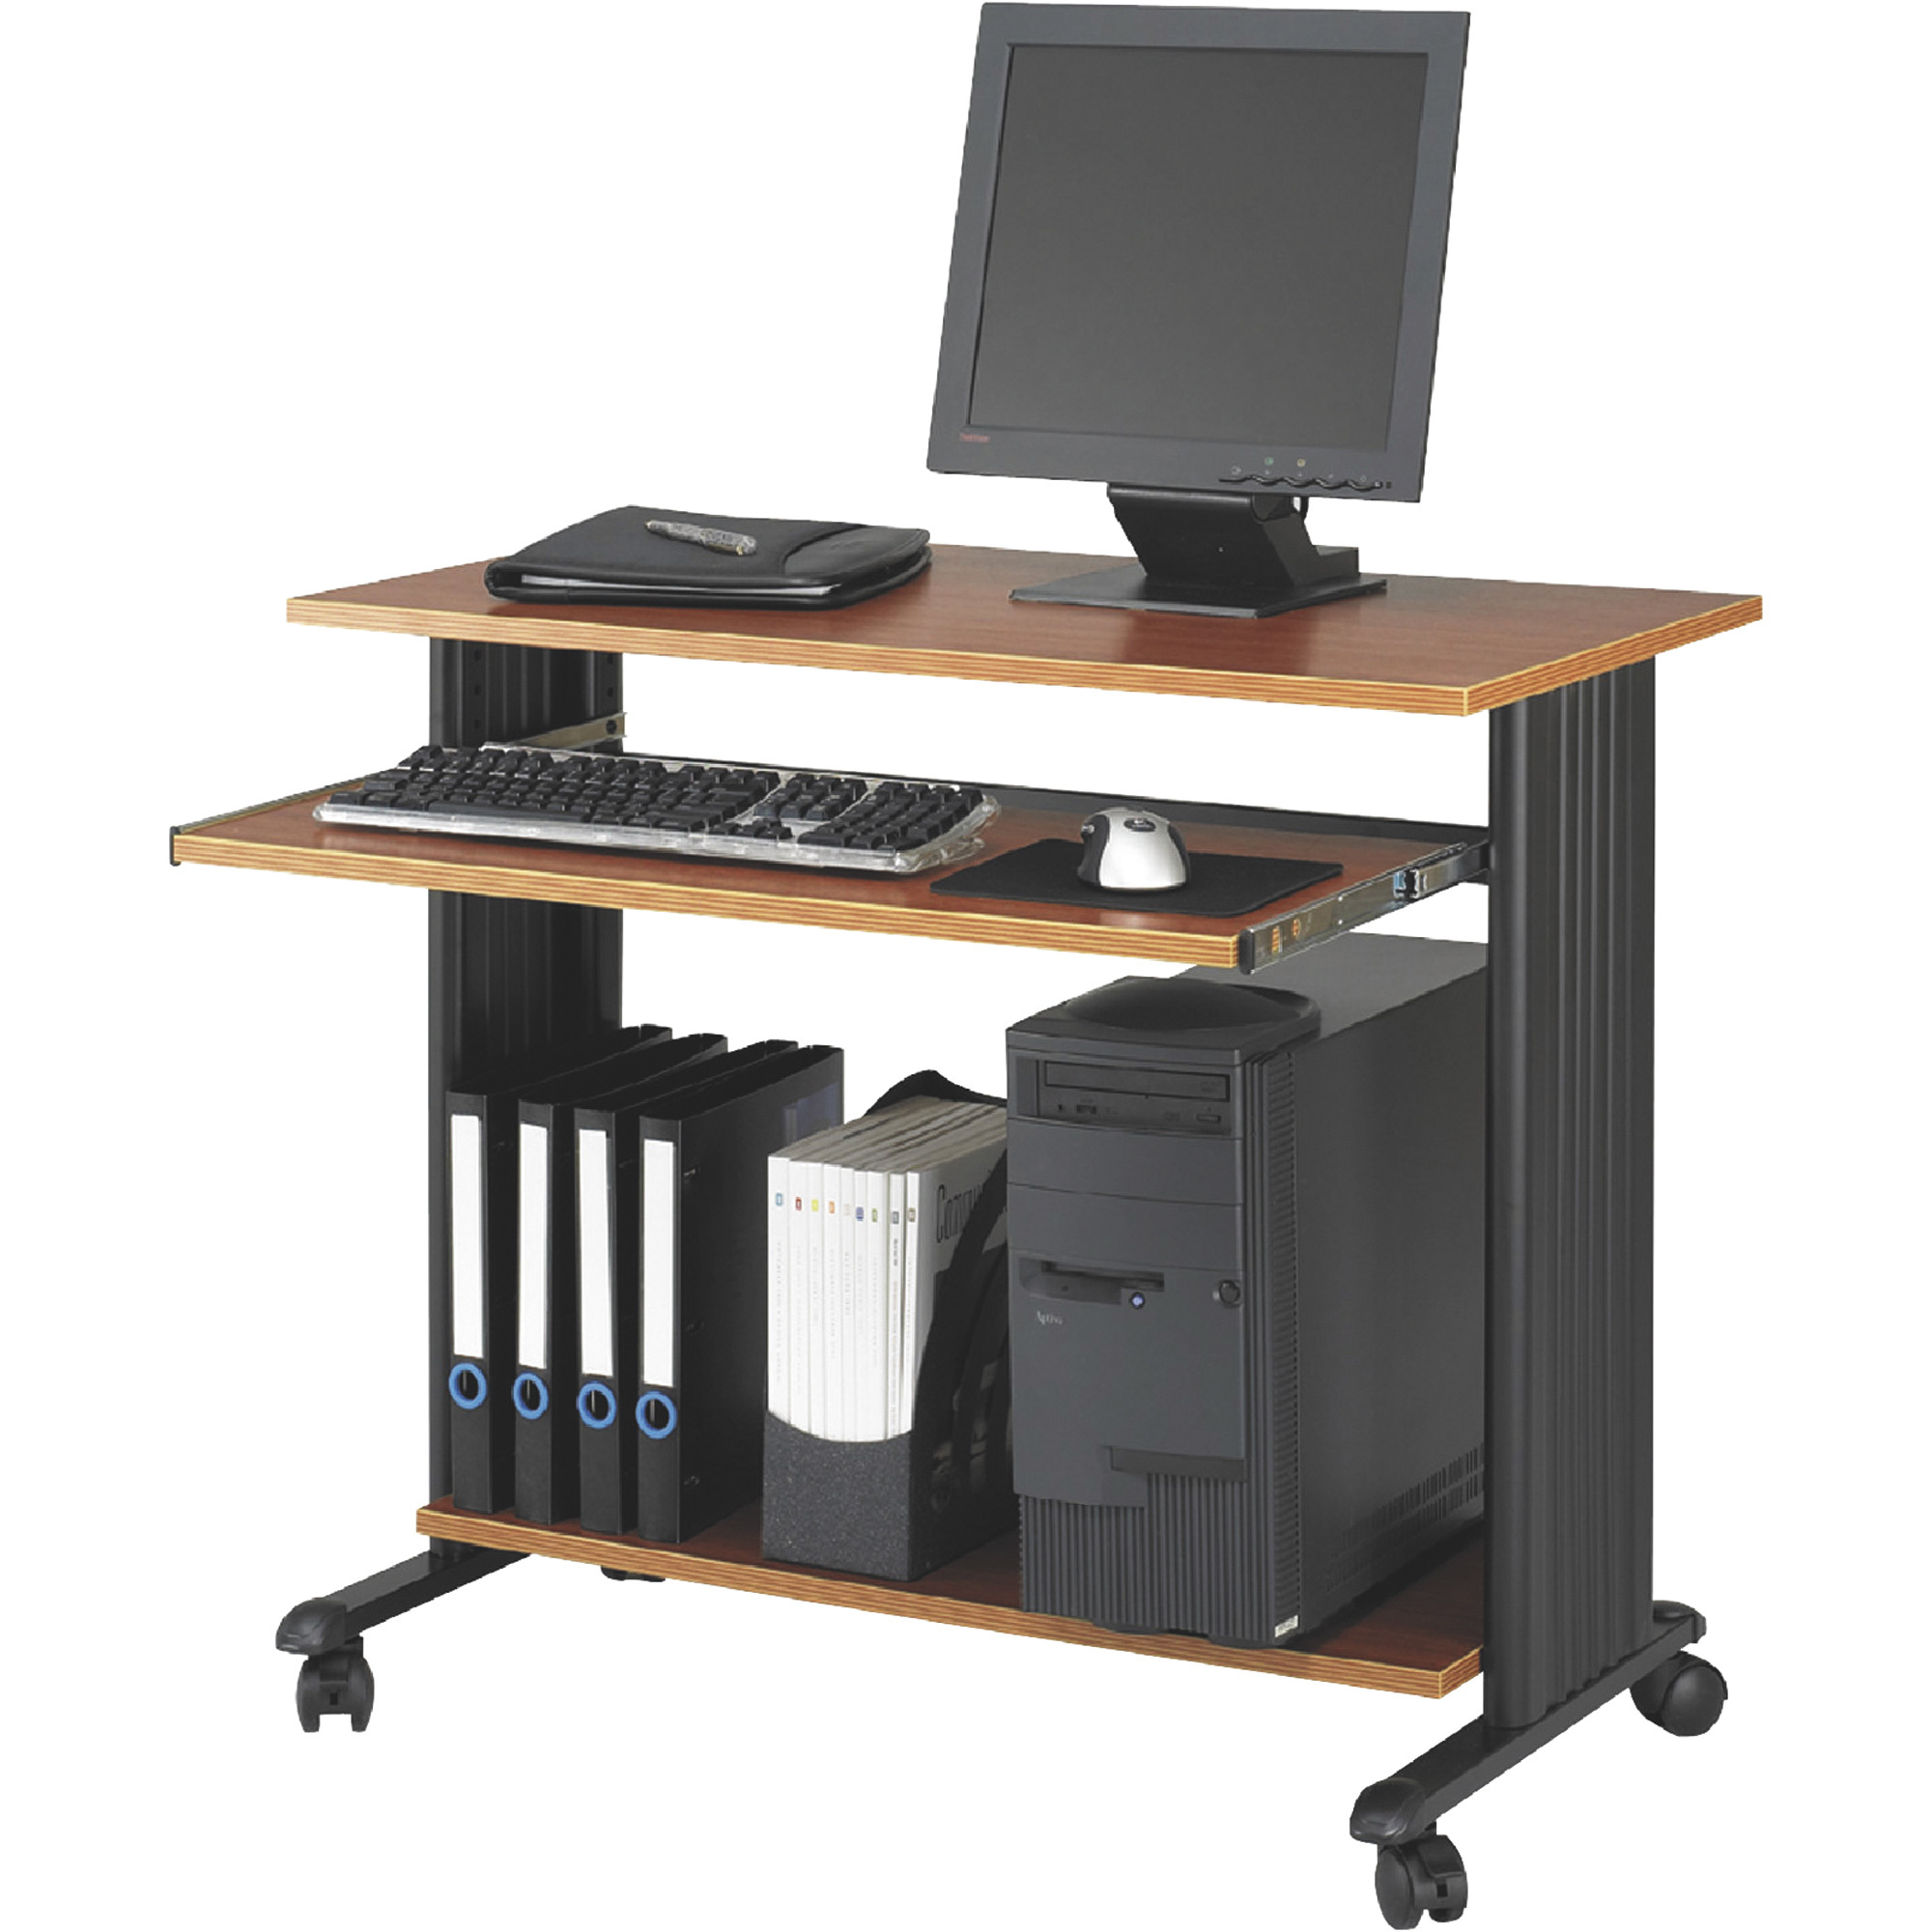 Safco Muv Fixed-Height Mobile Workstation Standing Desk – 35Inch W, Cherry/Black, Model 1921CY -  Mayline Safco